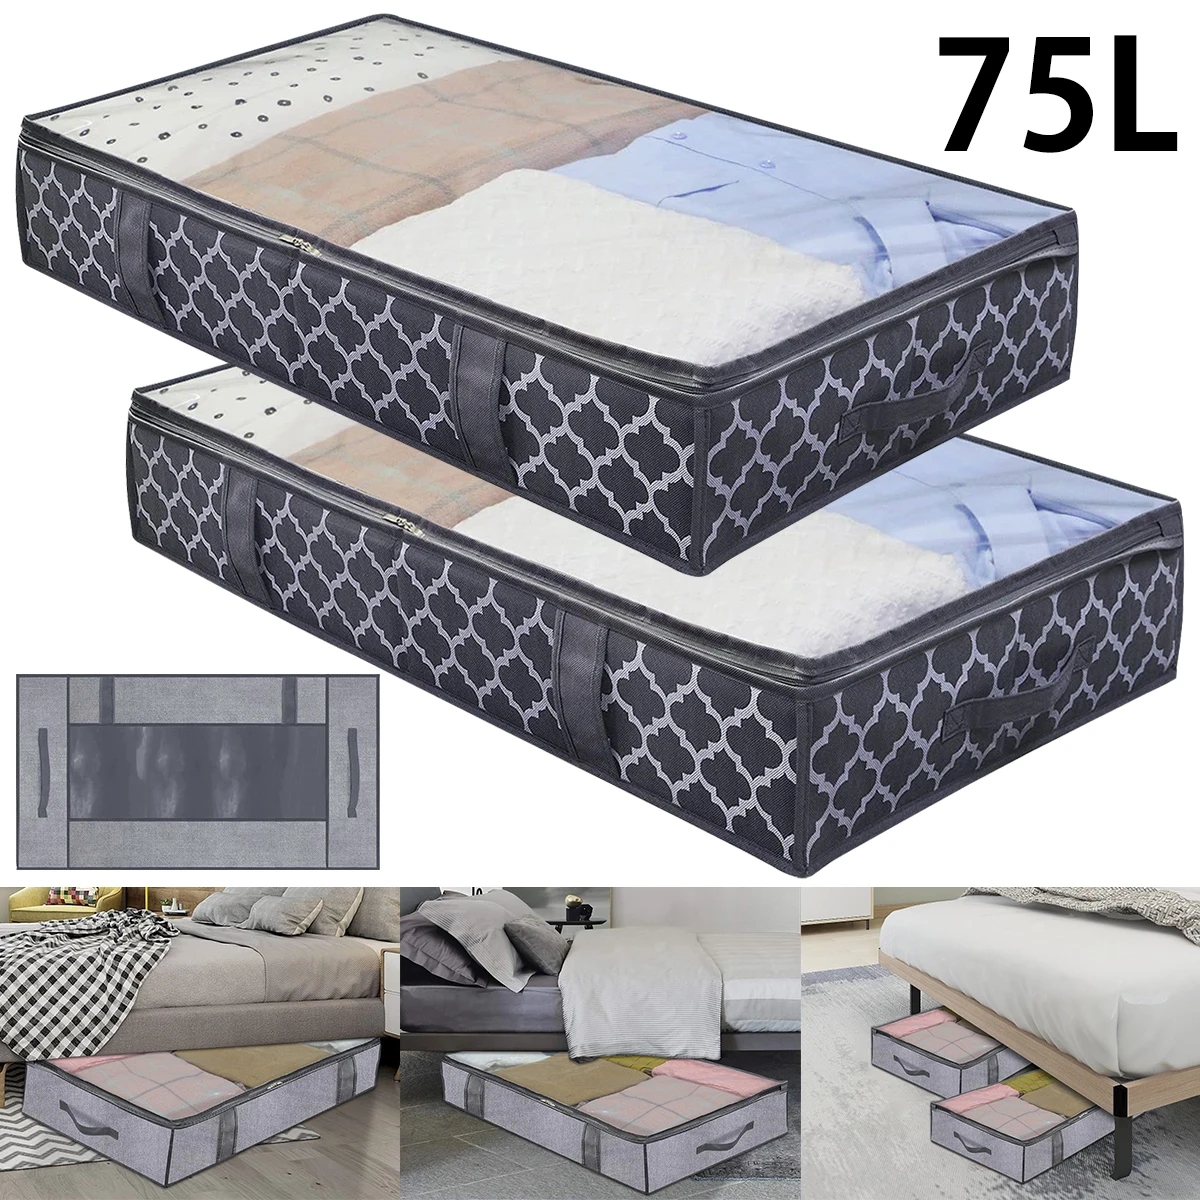 

2Pcs Breathable Under Bed Storage Bags Clothing Organizer Clear Cover Foldable Clothes Linens Bedding Closets Bedroom Underbed